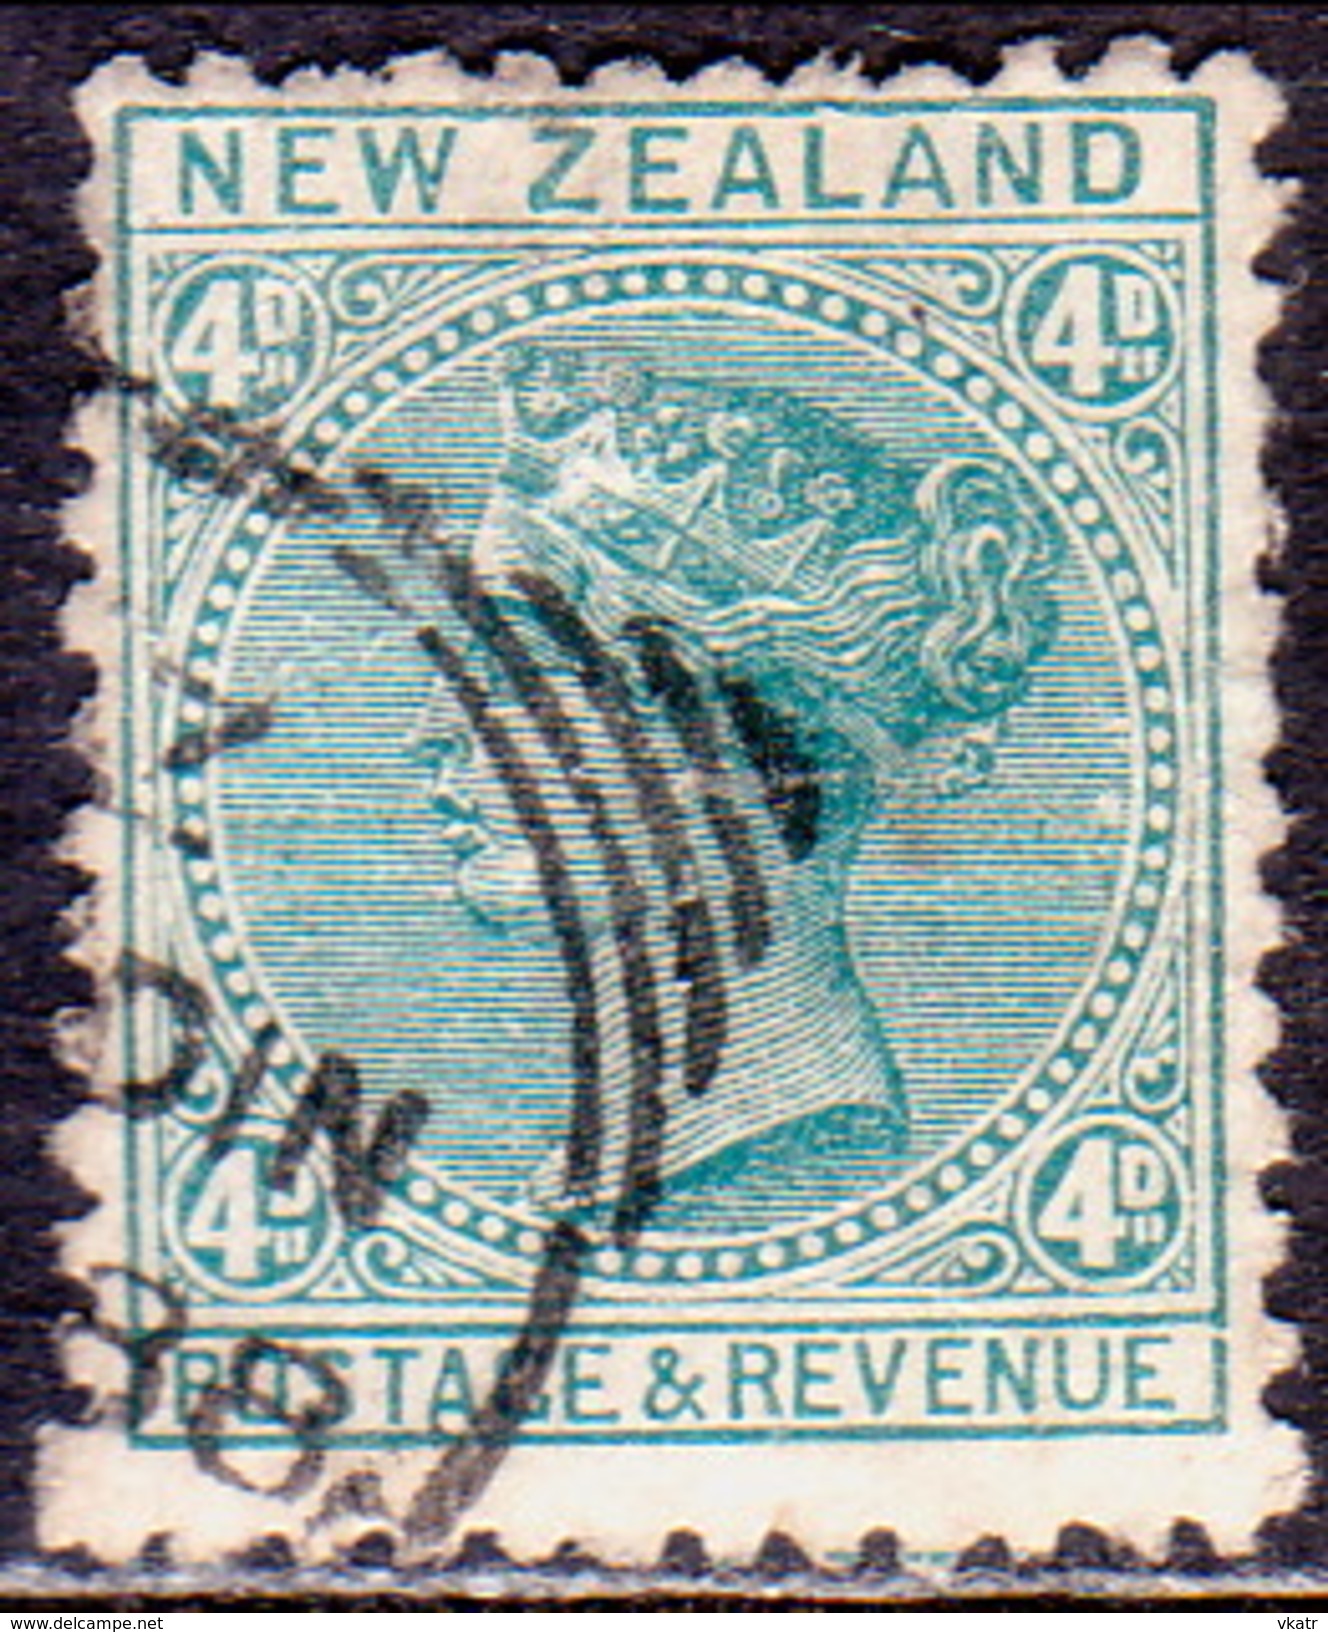 NEW ZEALAND 1897 SG 241a 4d Used Perf. 11 Bluish Green - Used Stamps